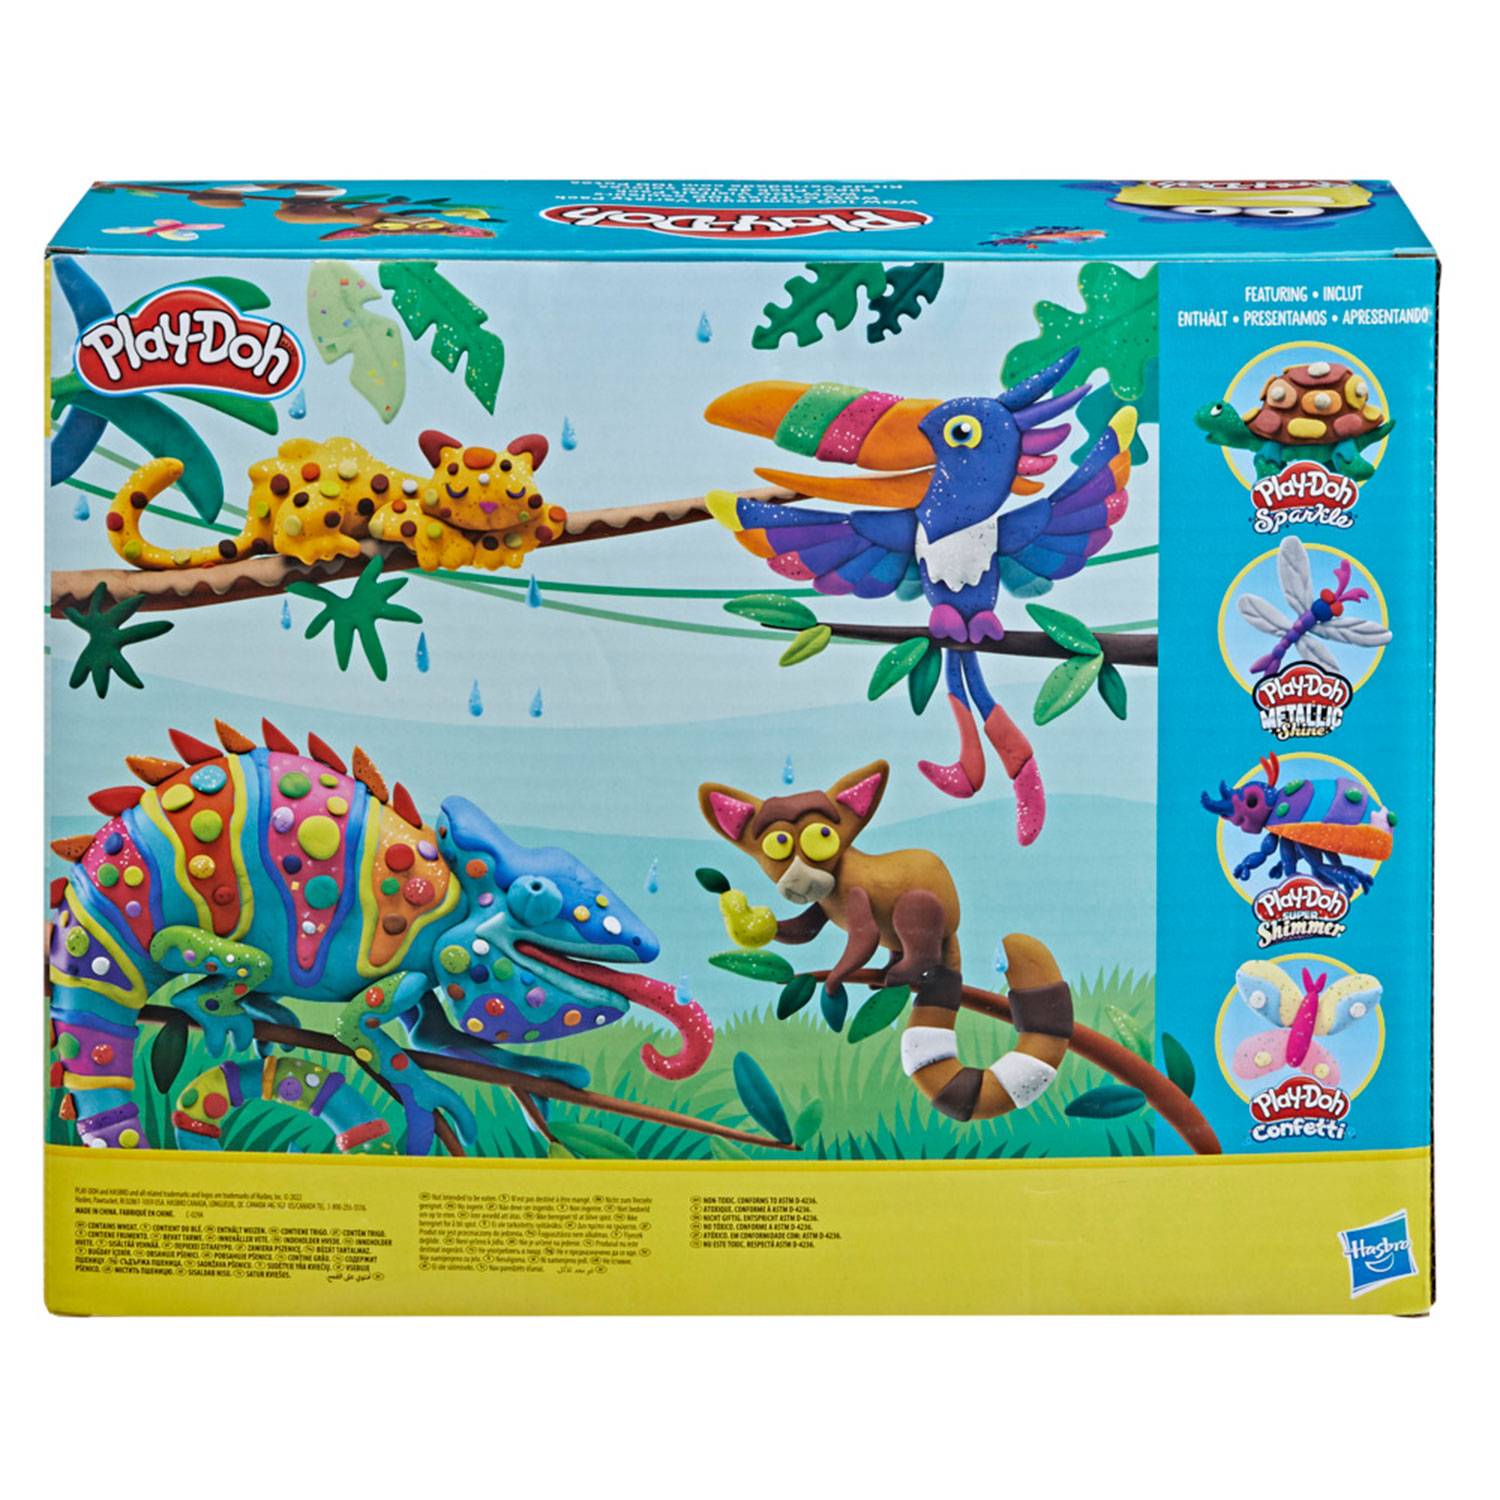 Play Doh: Super Pack Wow 100 Colores